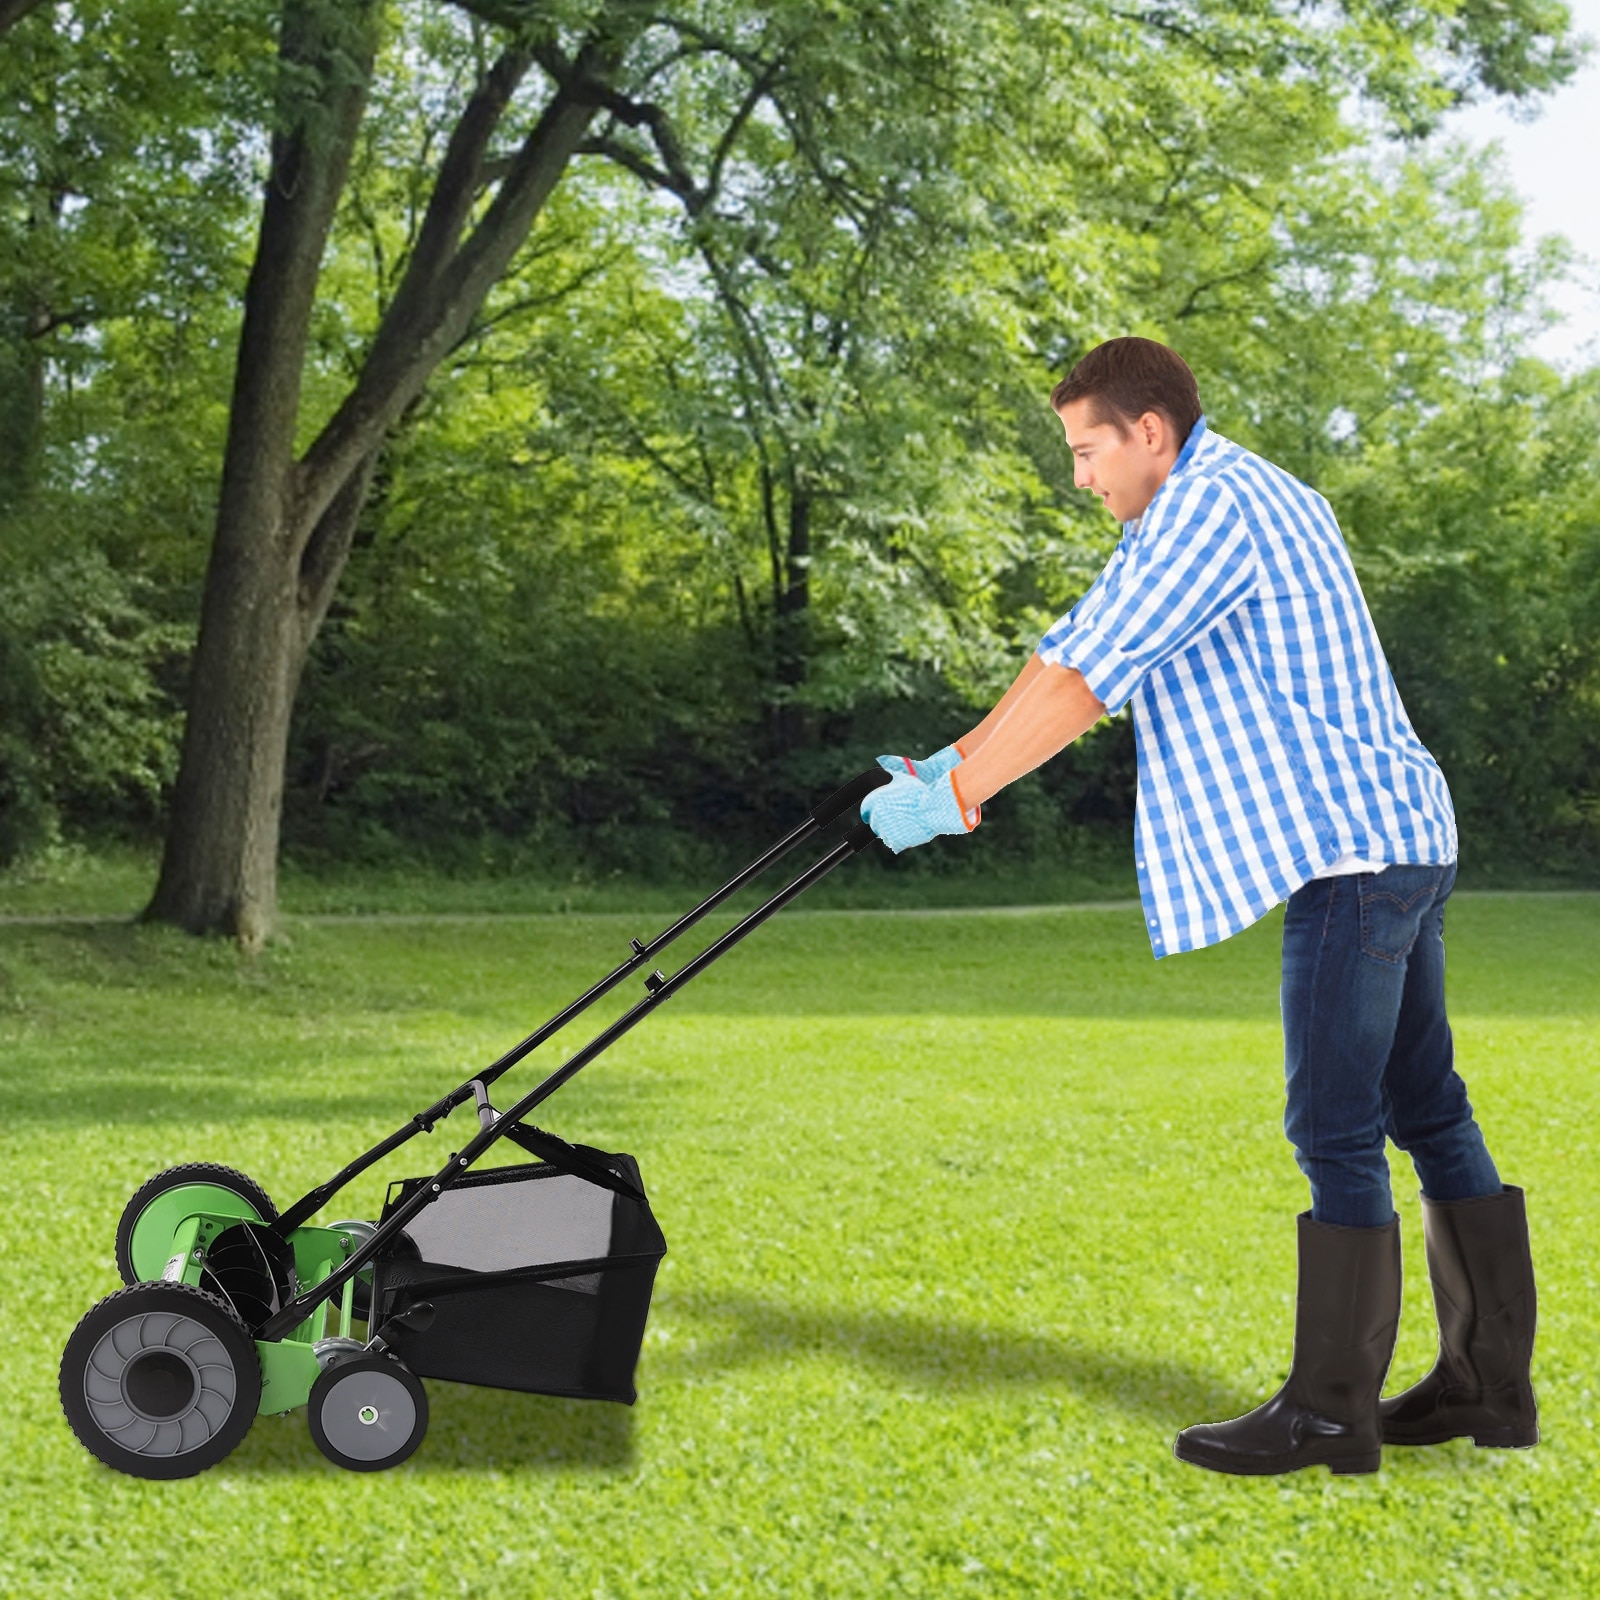 Cylinder Lawnmower Push Reel Lawn Mower with Grass Catcher - Green/Black